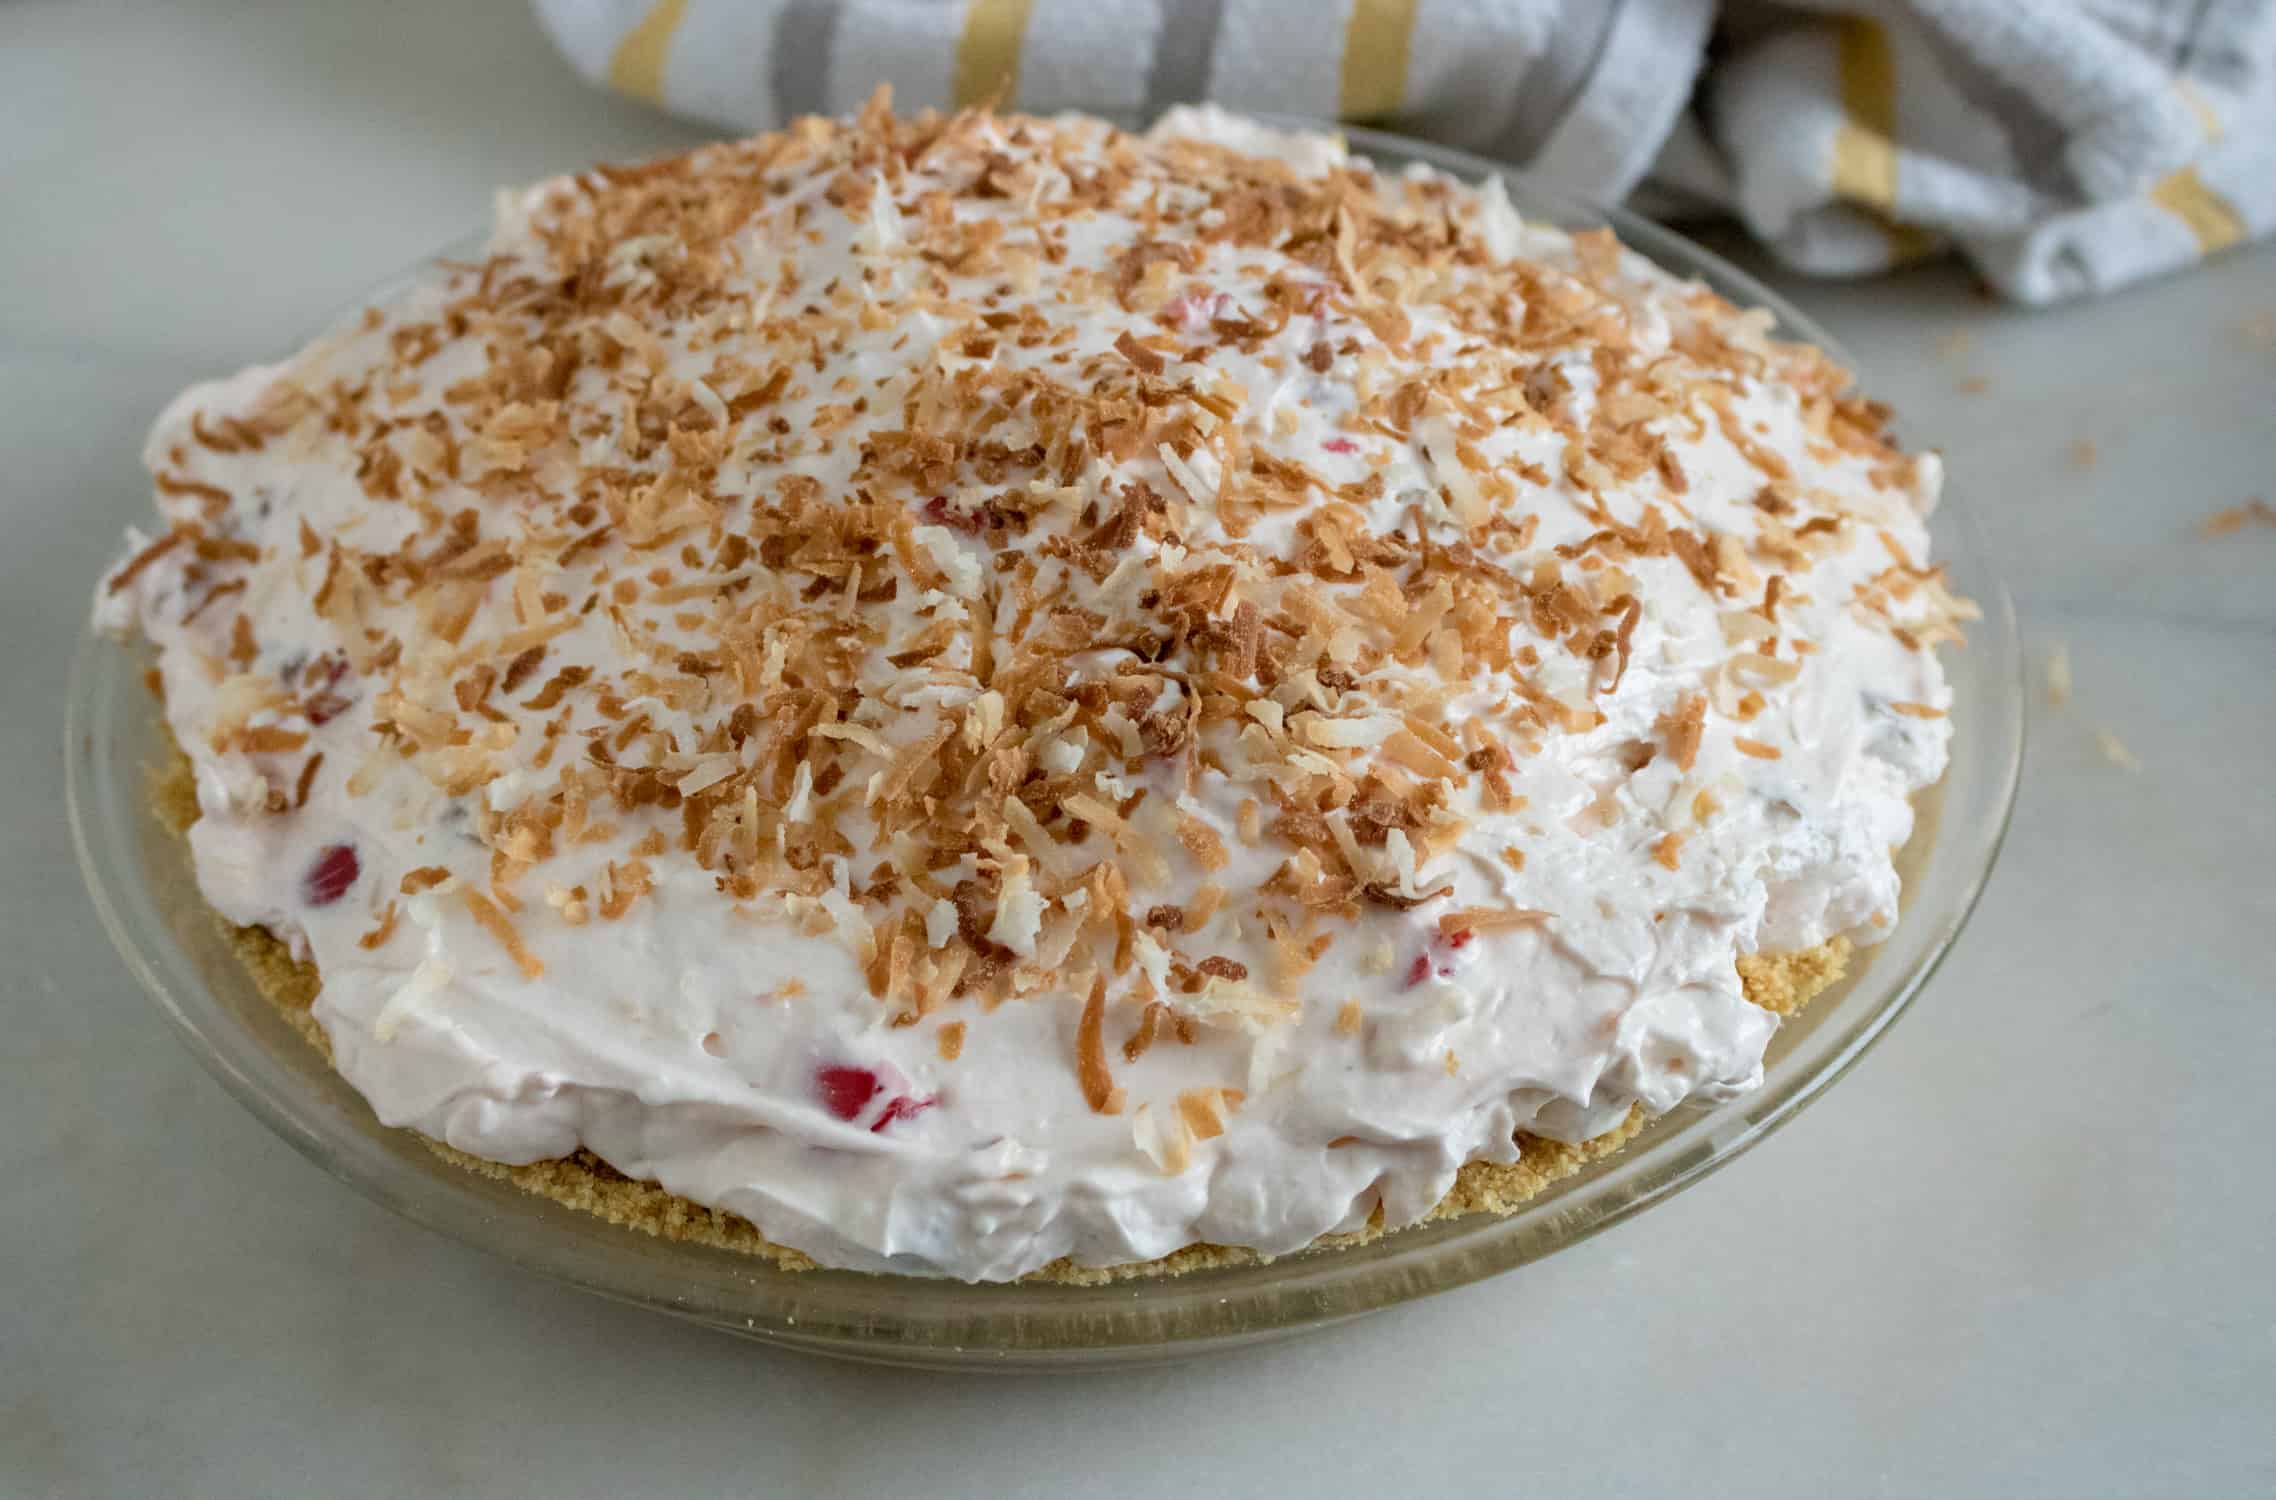 Assembled pie in a pie plate. Graham cracker crust, cream cheese mixture and whipped topping with toasted coconut garnish